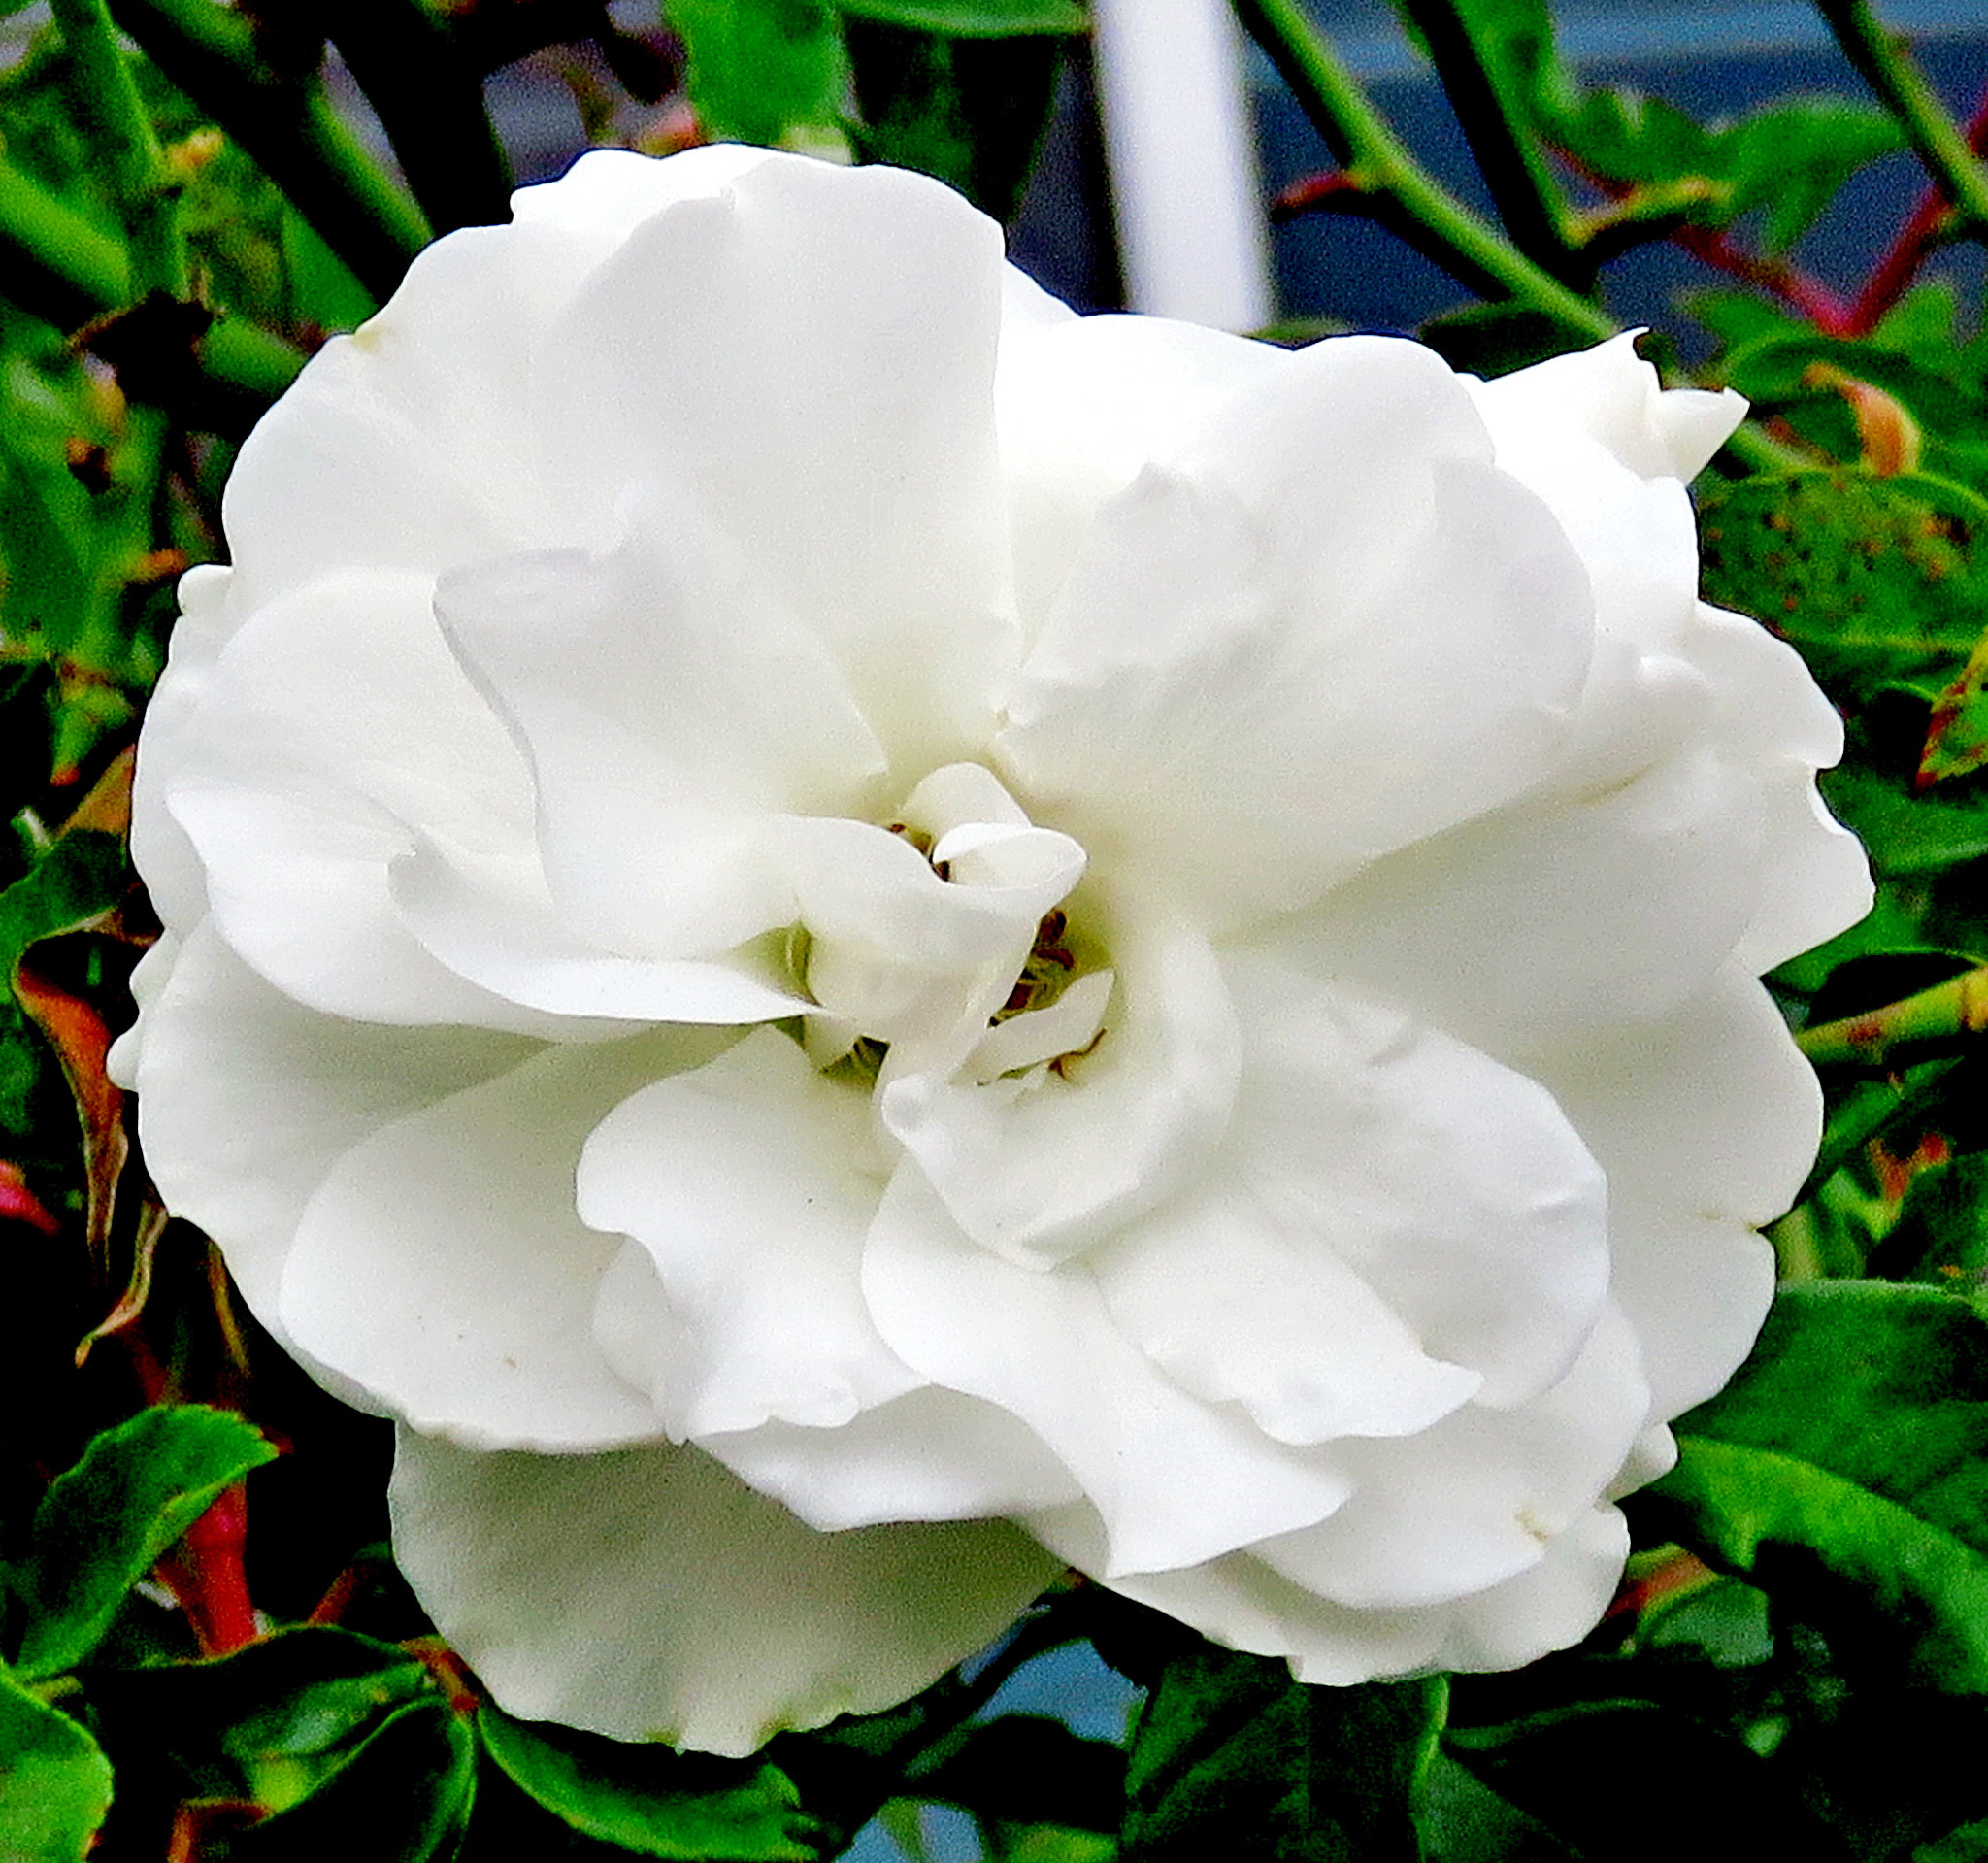 Canon PowerShot SX60 HS sample photo. A white carnation flower photography